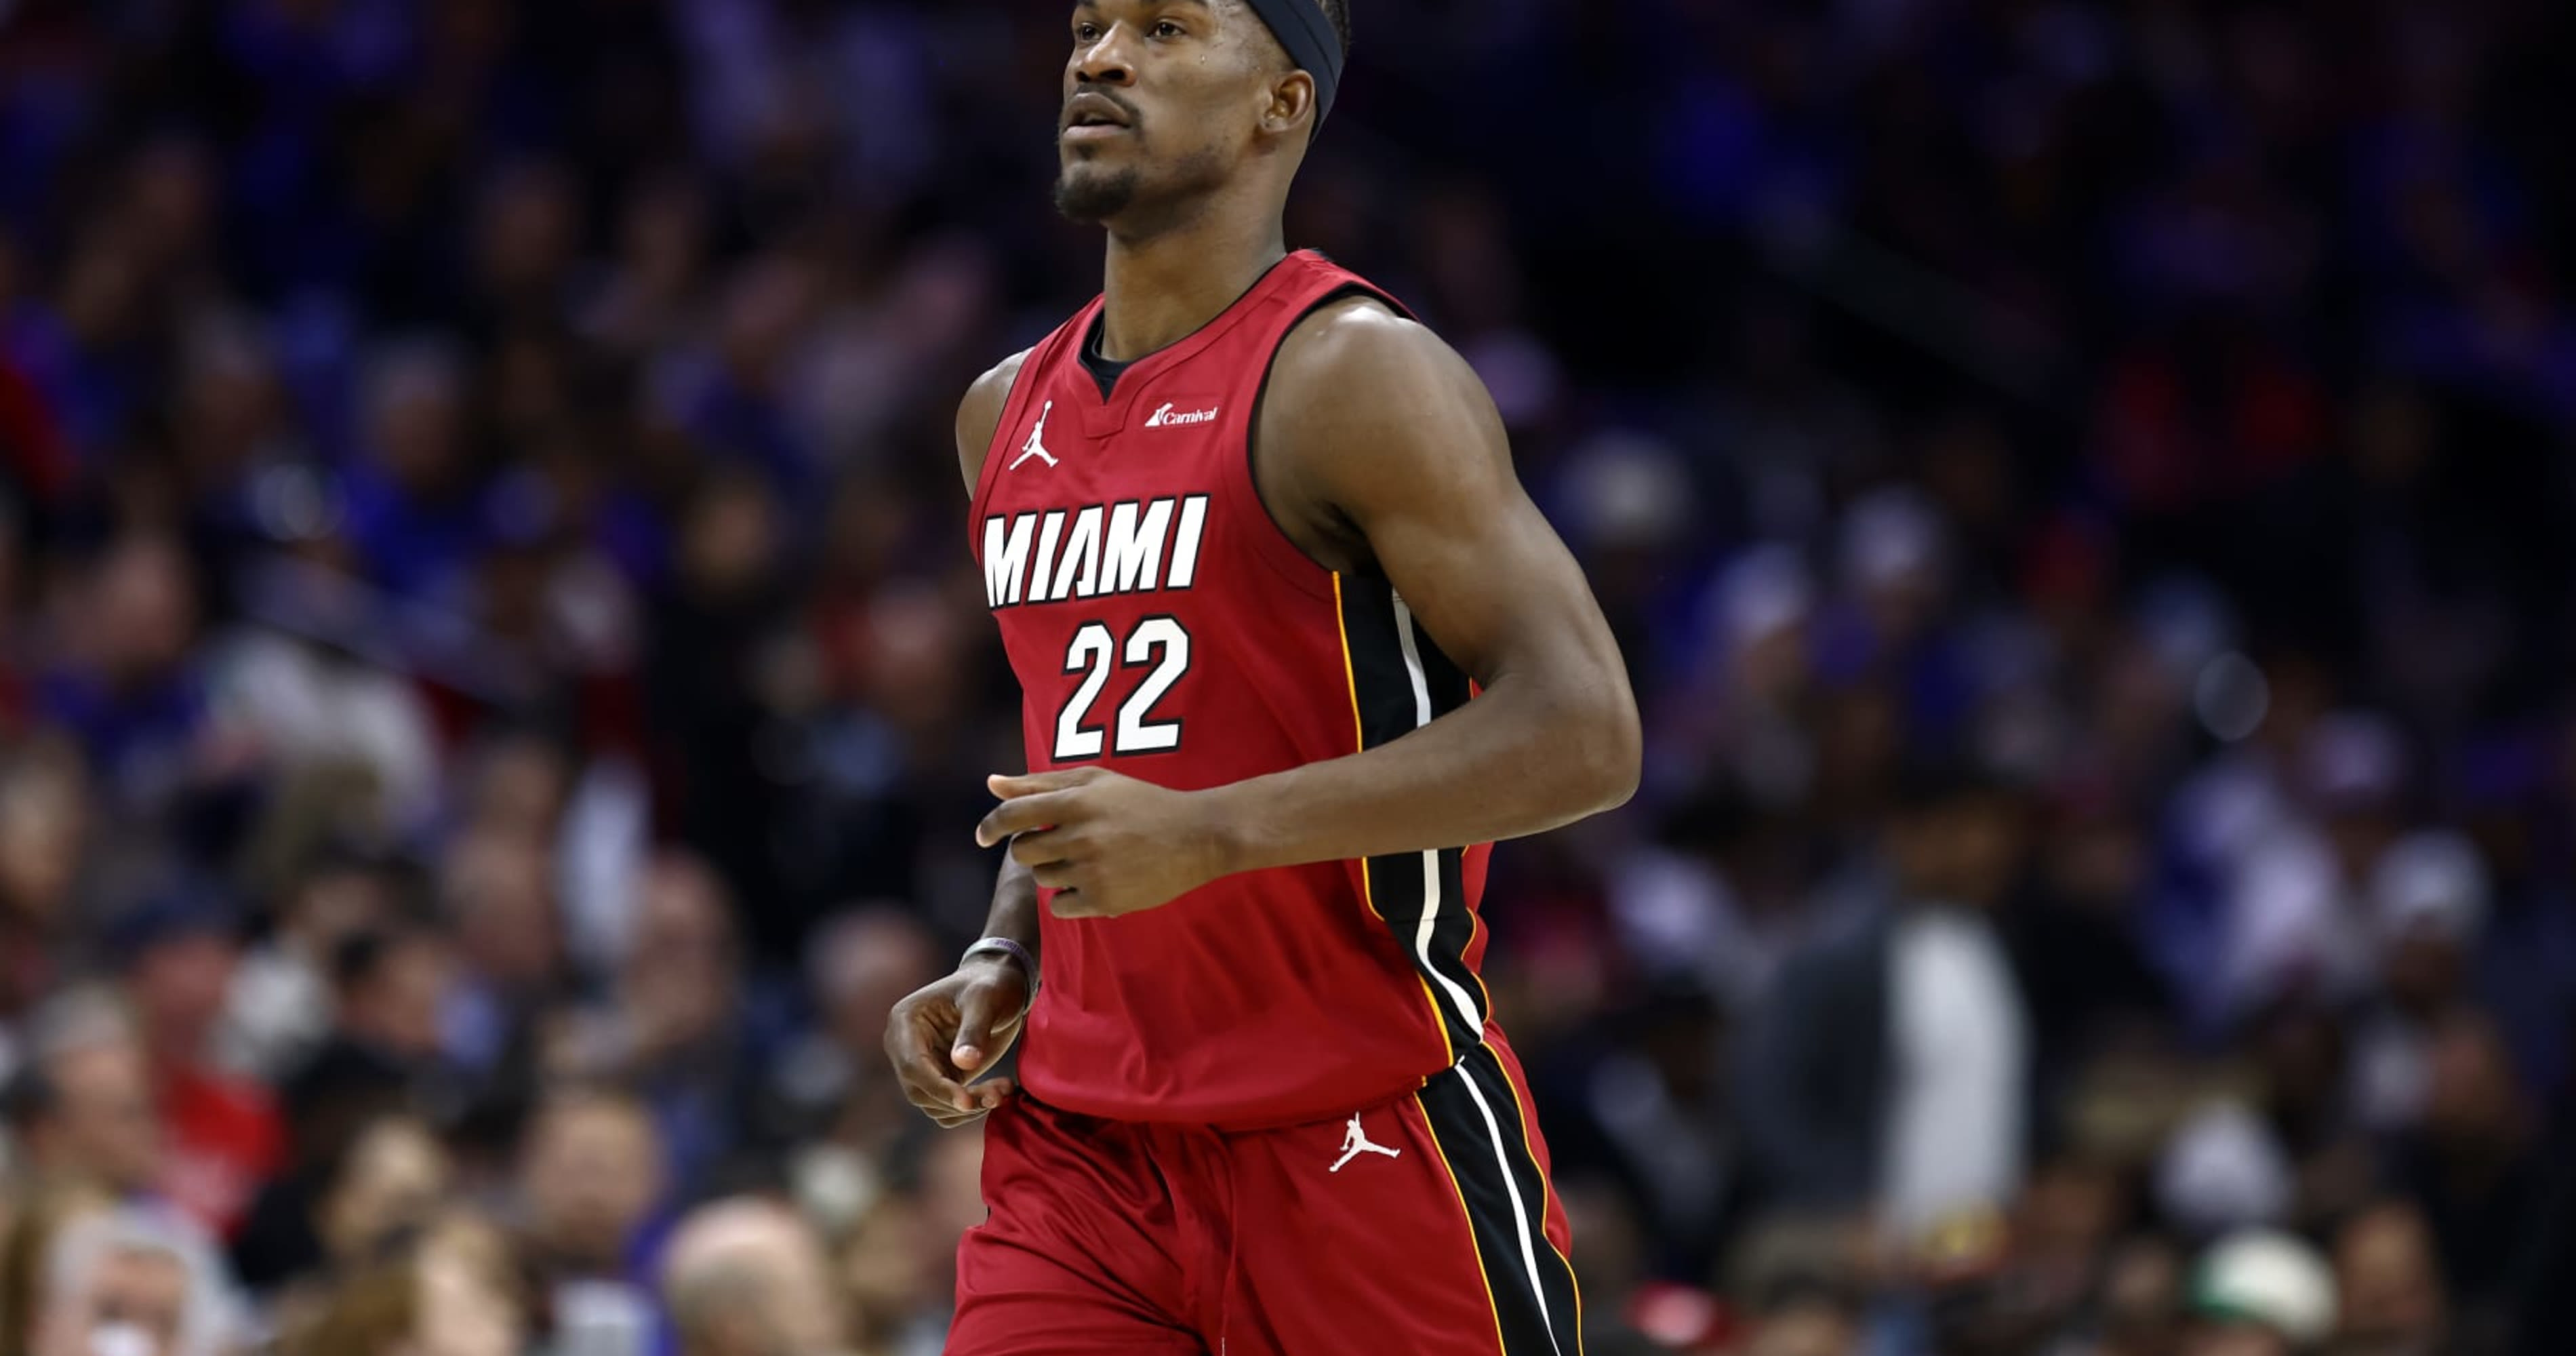 3-Team Trade to Land Jimmy Butler with Golden State Warriors